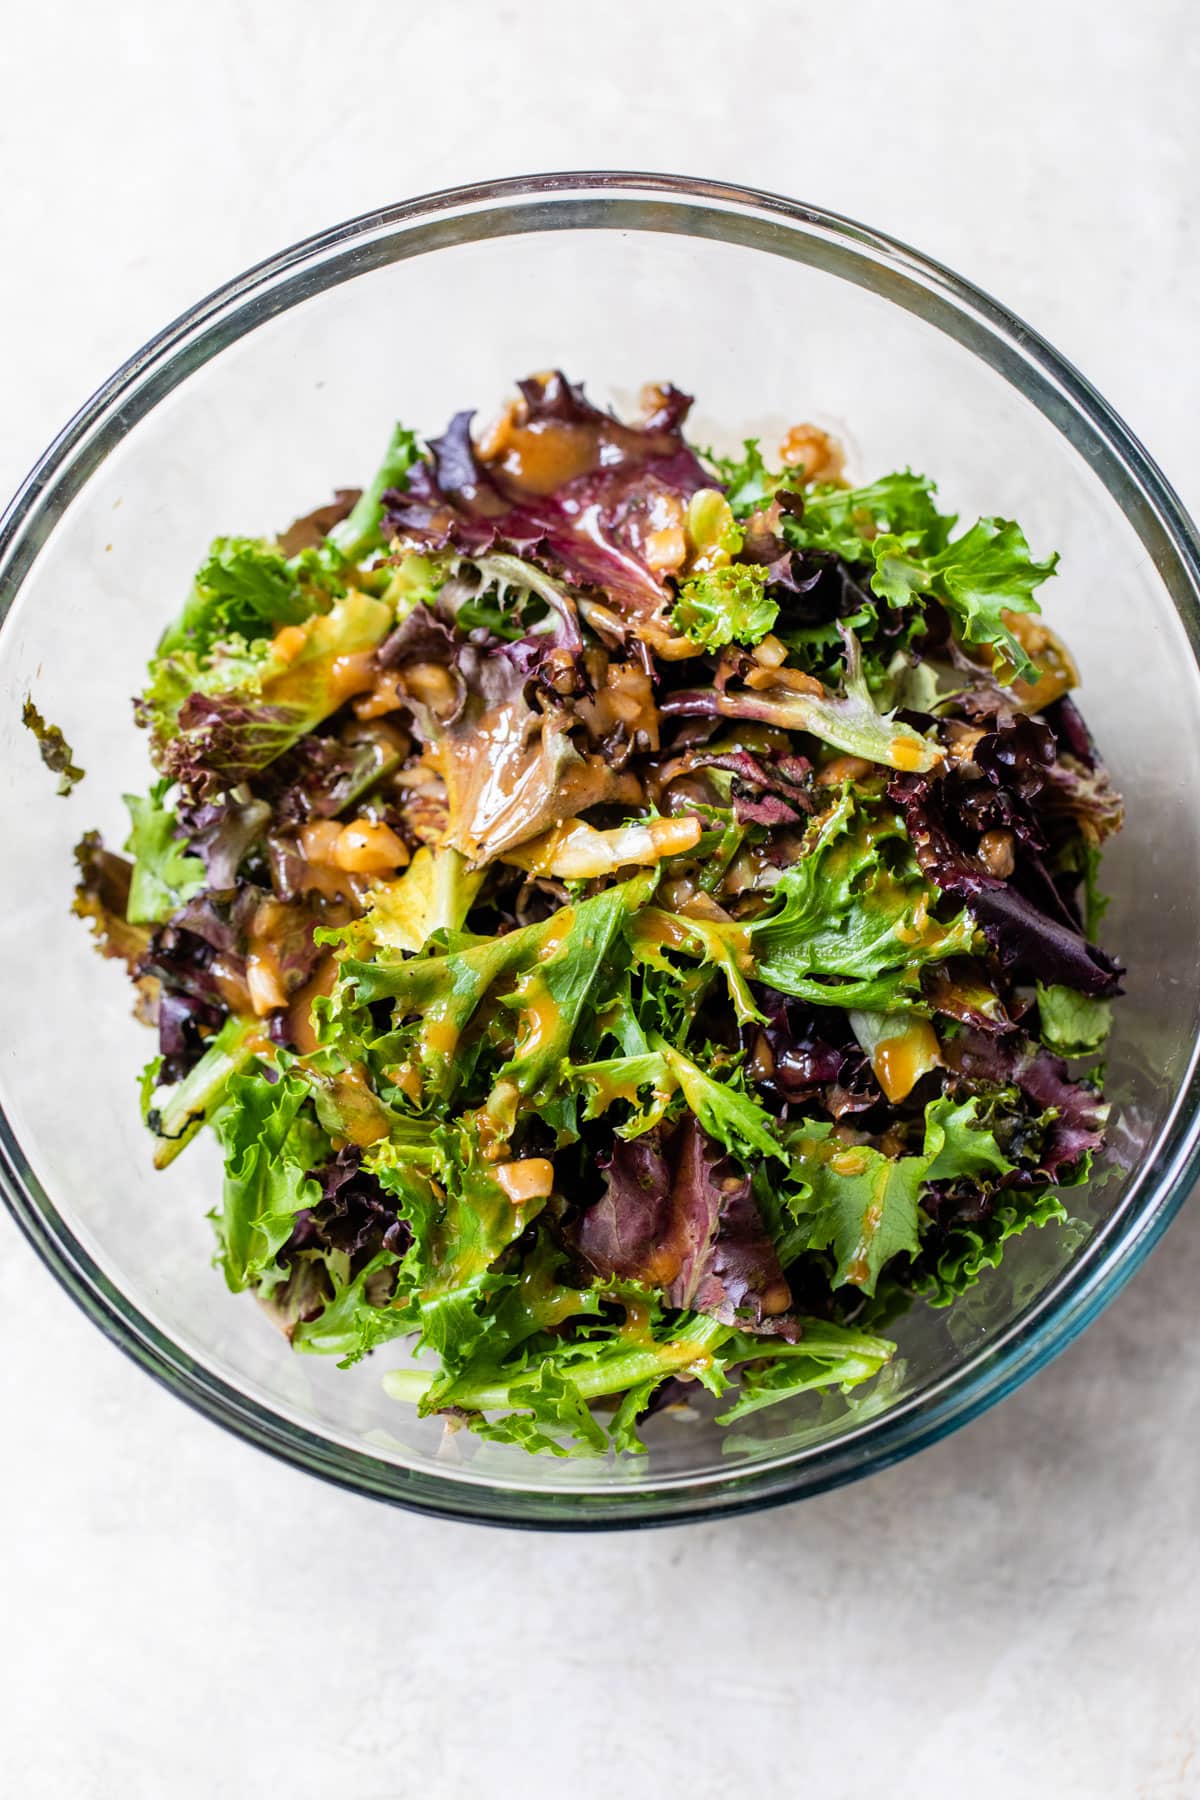 mixed greens in a bowl topped with balsamic viniagrette